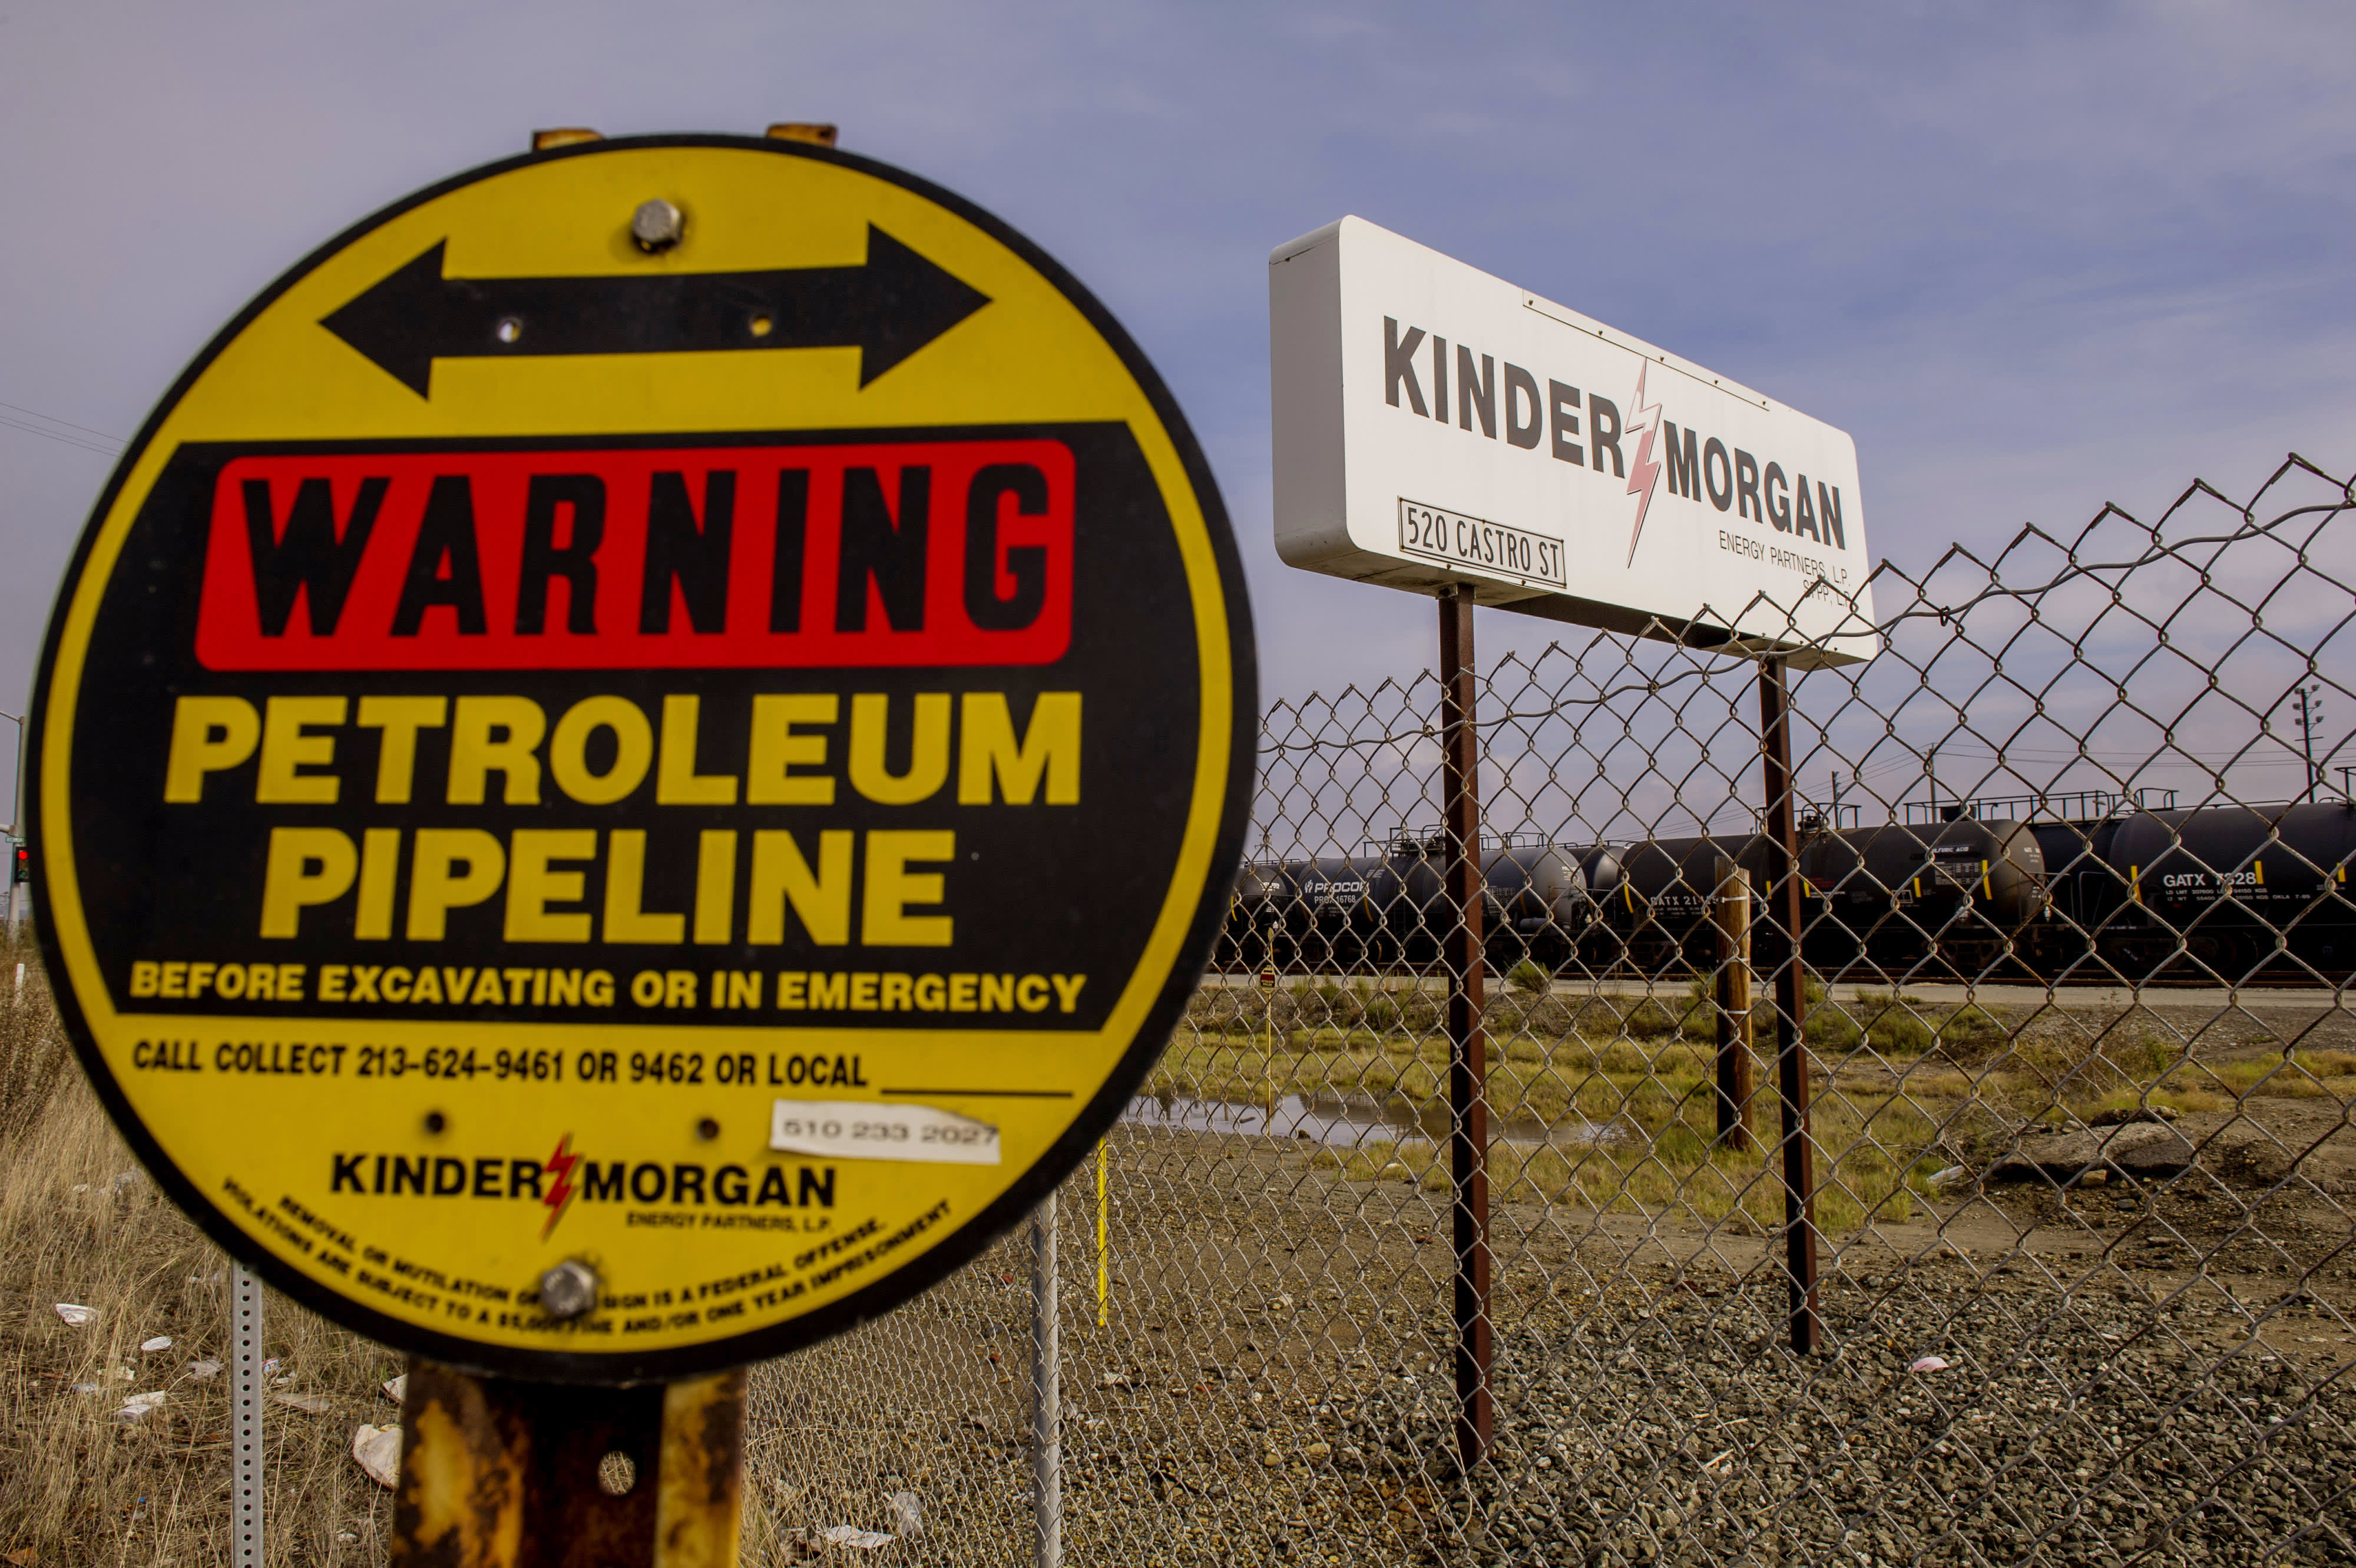 Kinder Morgan, Chipotle, Whirlpool and more